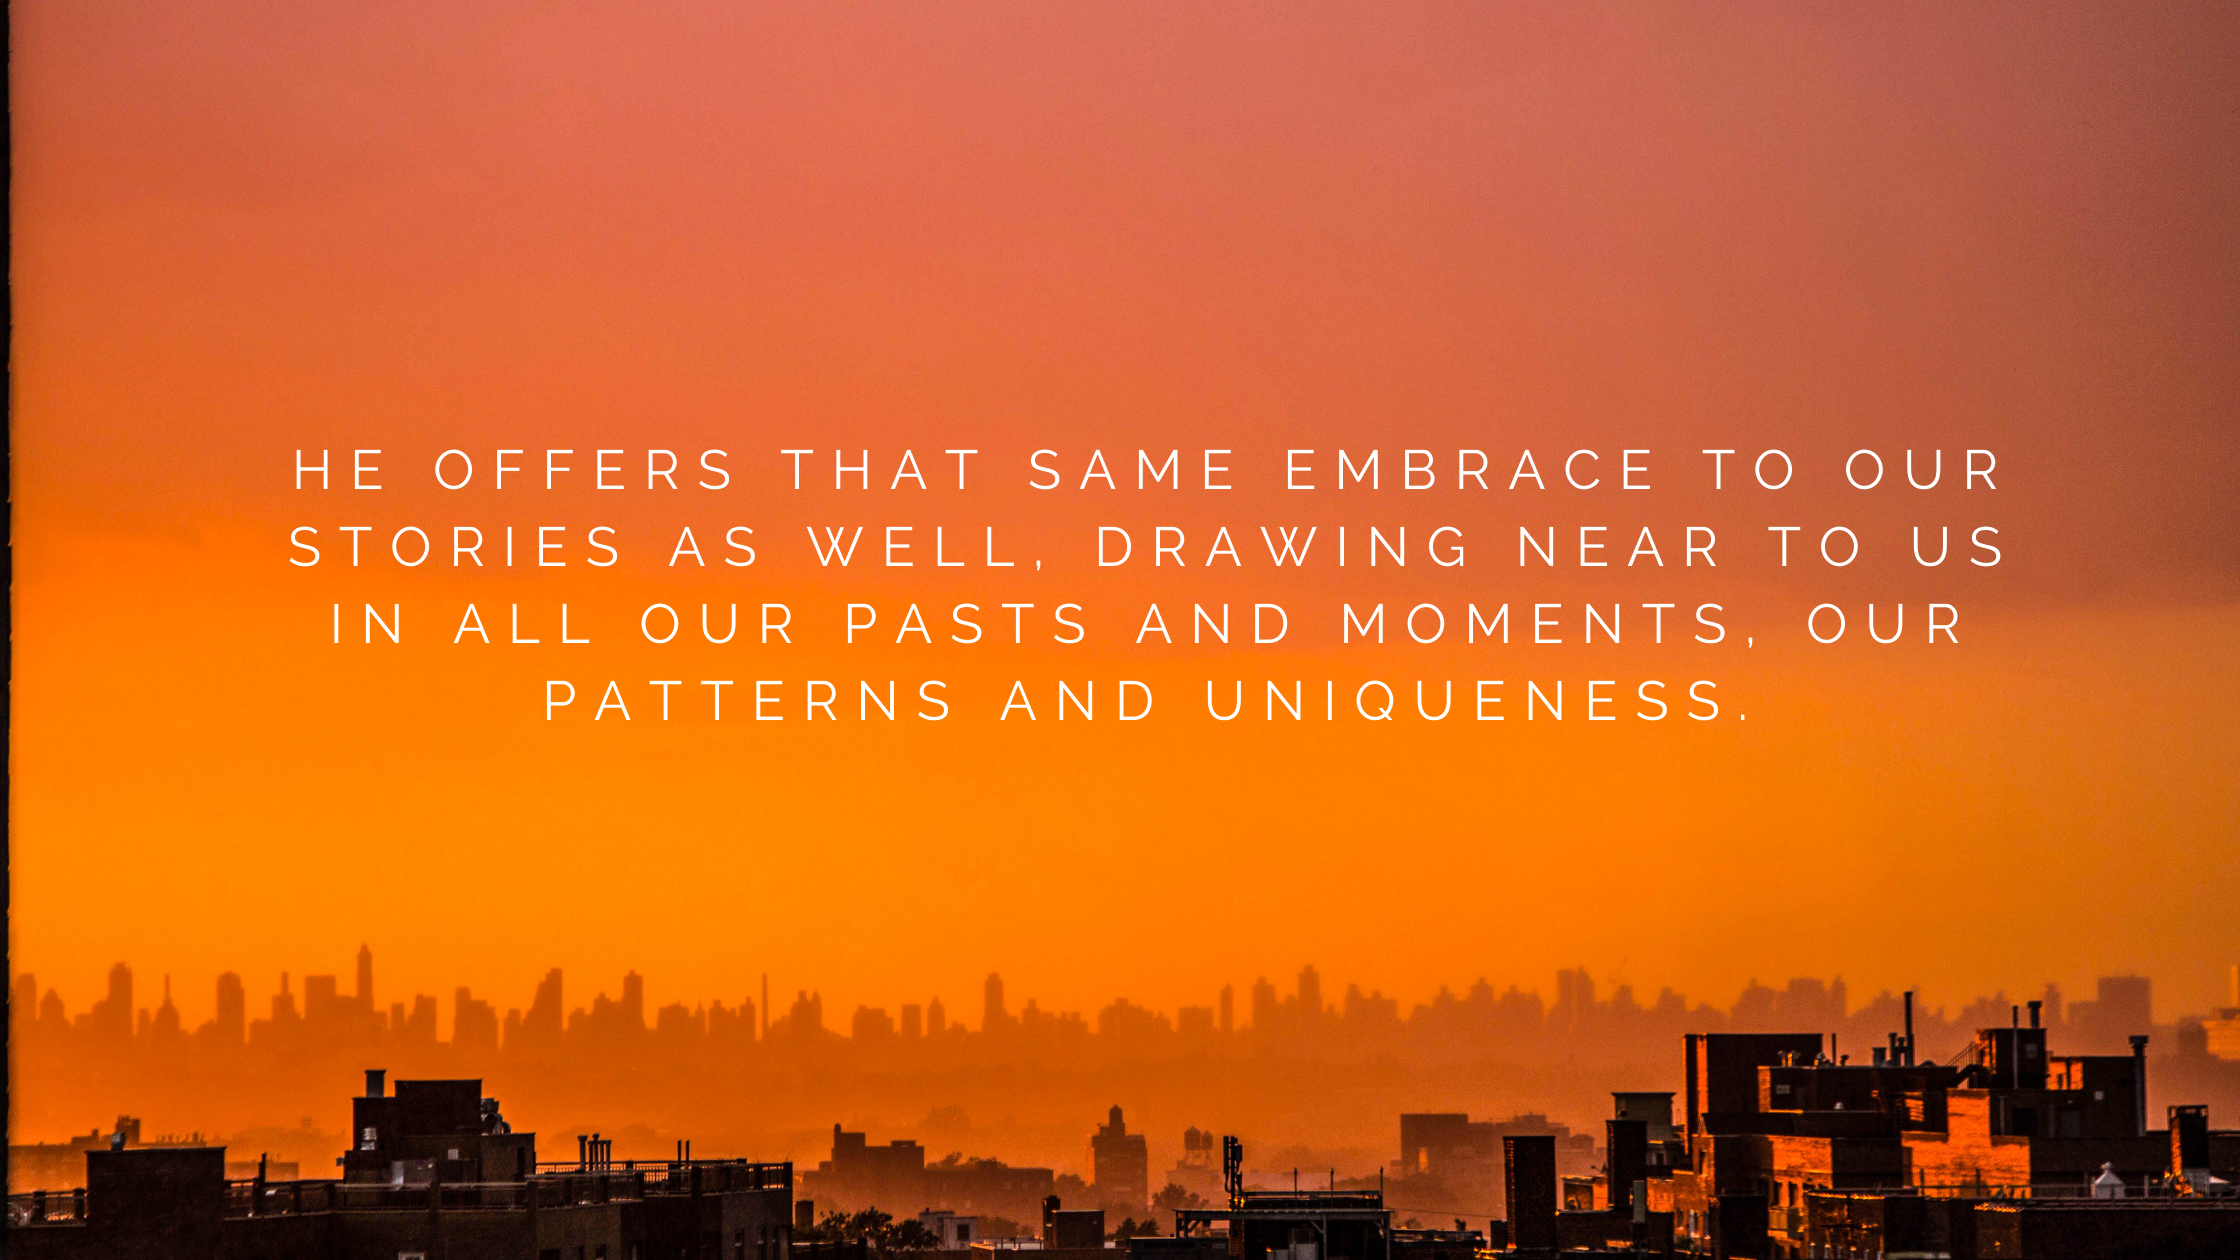 He offers that same embrace to our stories as well, drawing near to us in all our pasts and moments, our patterns and uniqueness.